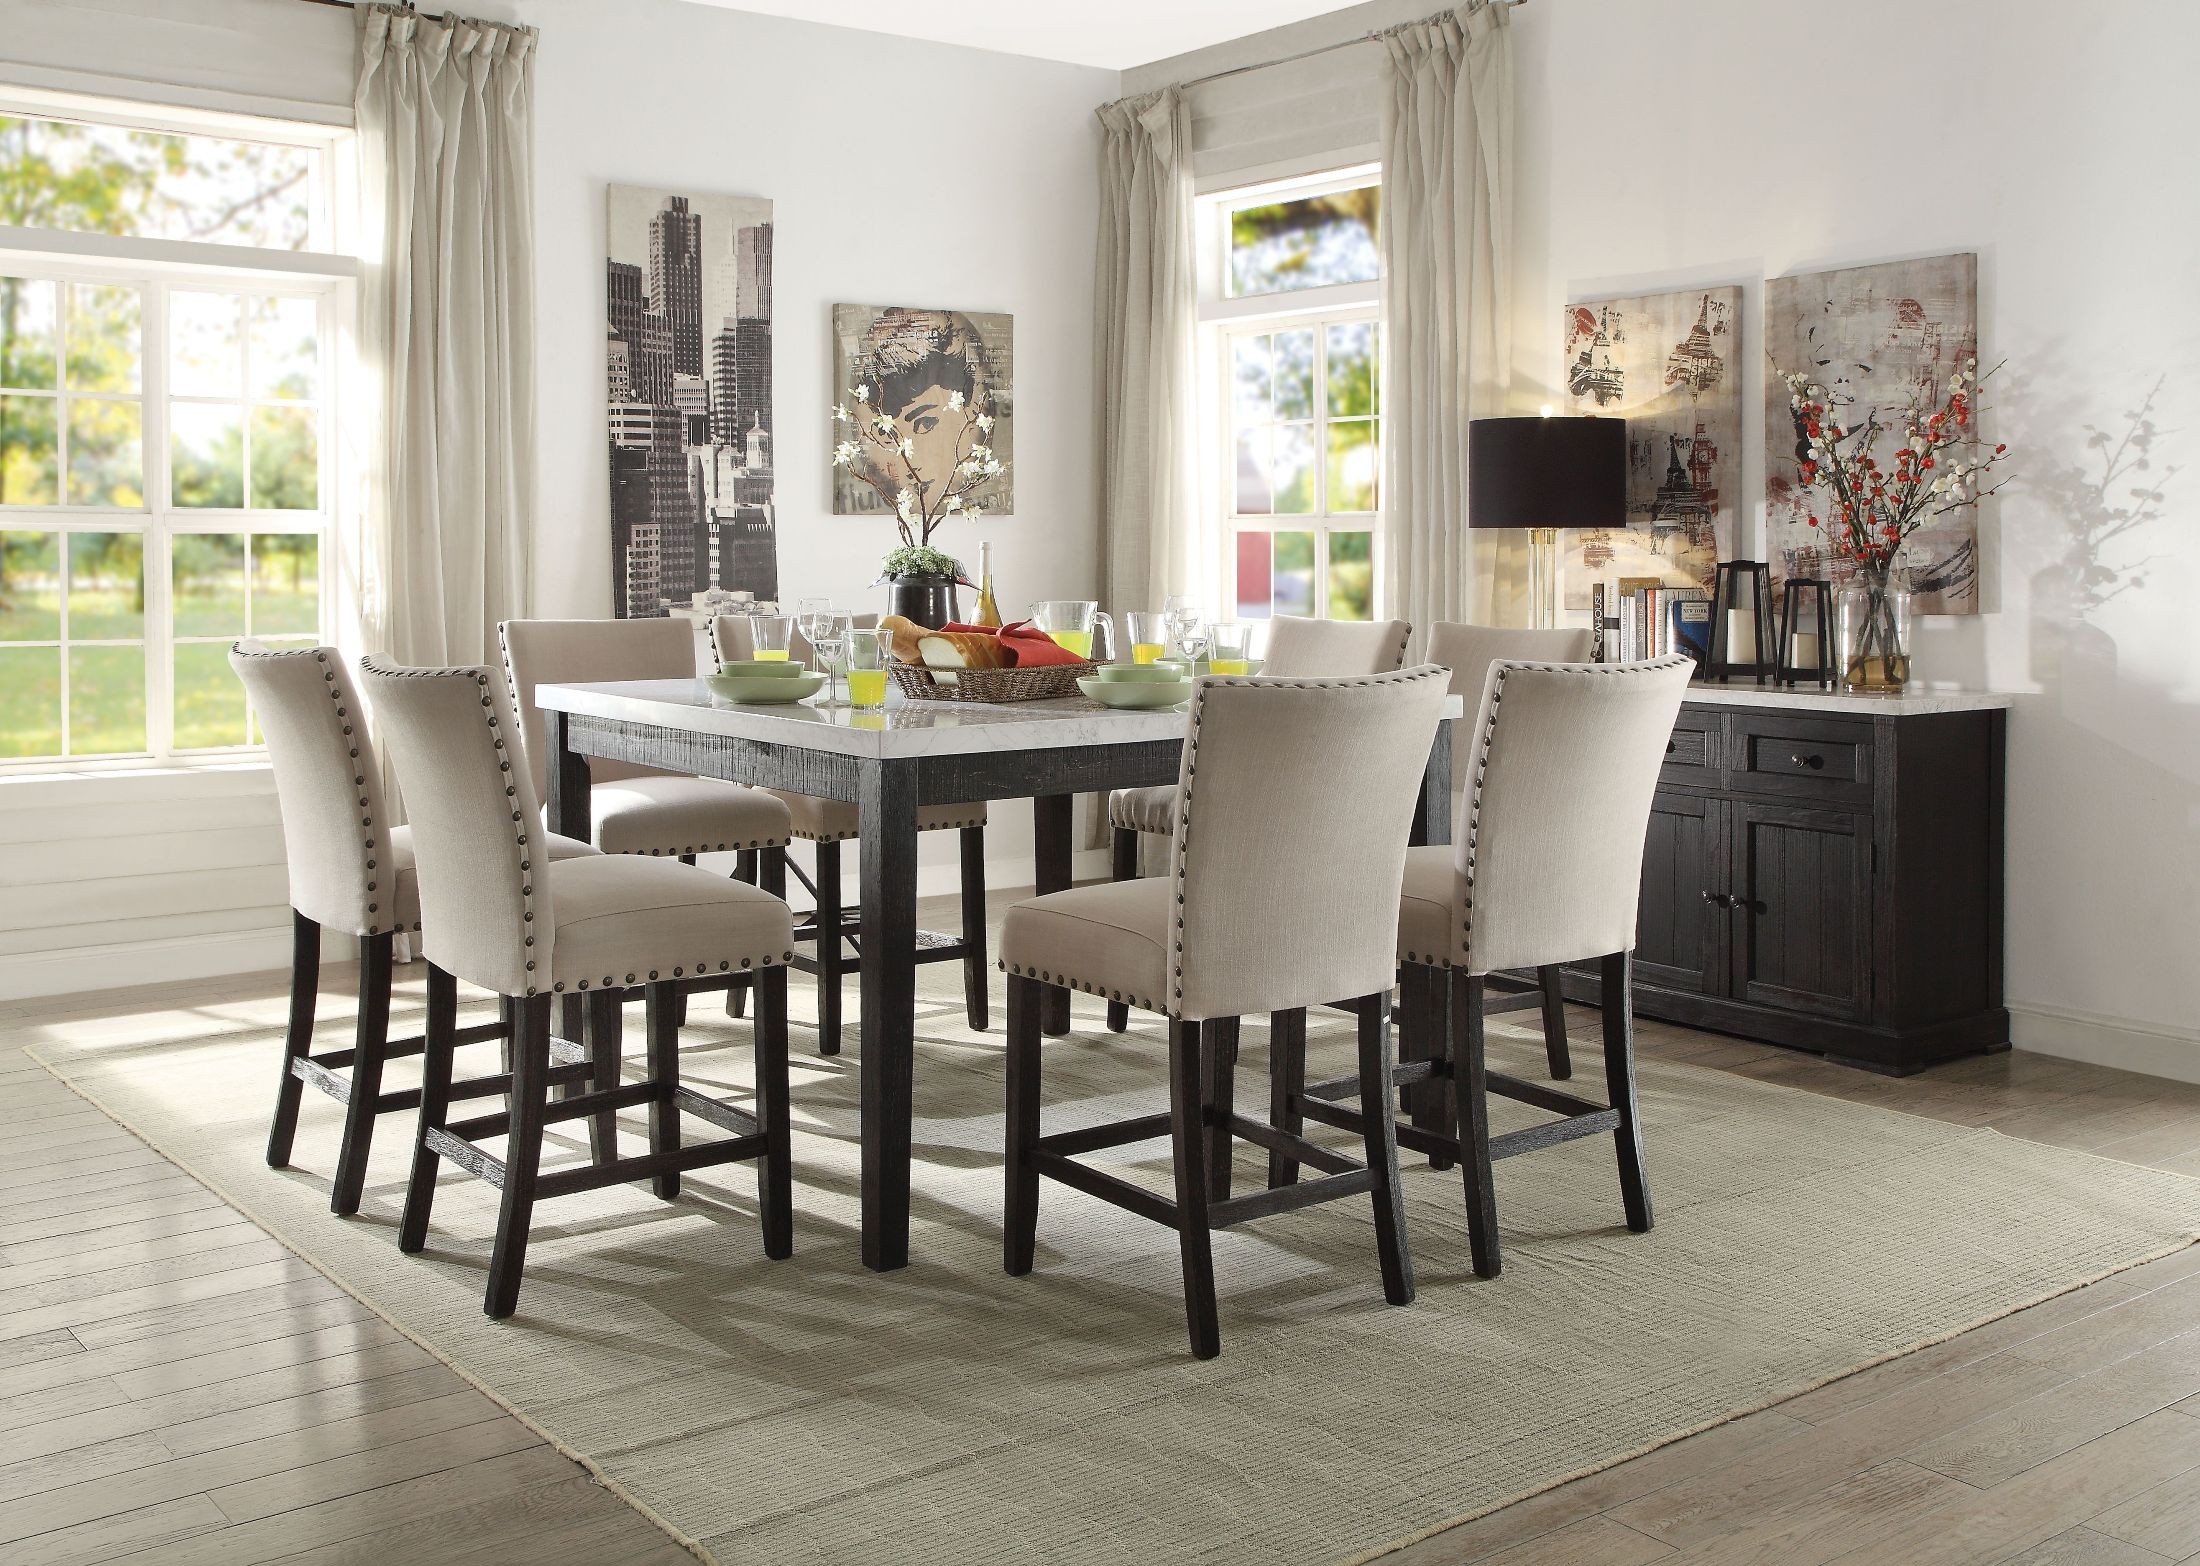 Dark Oak Counter Height Dining Room Set, Counter Height Dining Table 8 Chairs